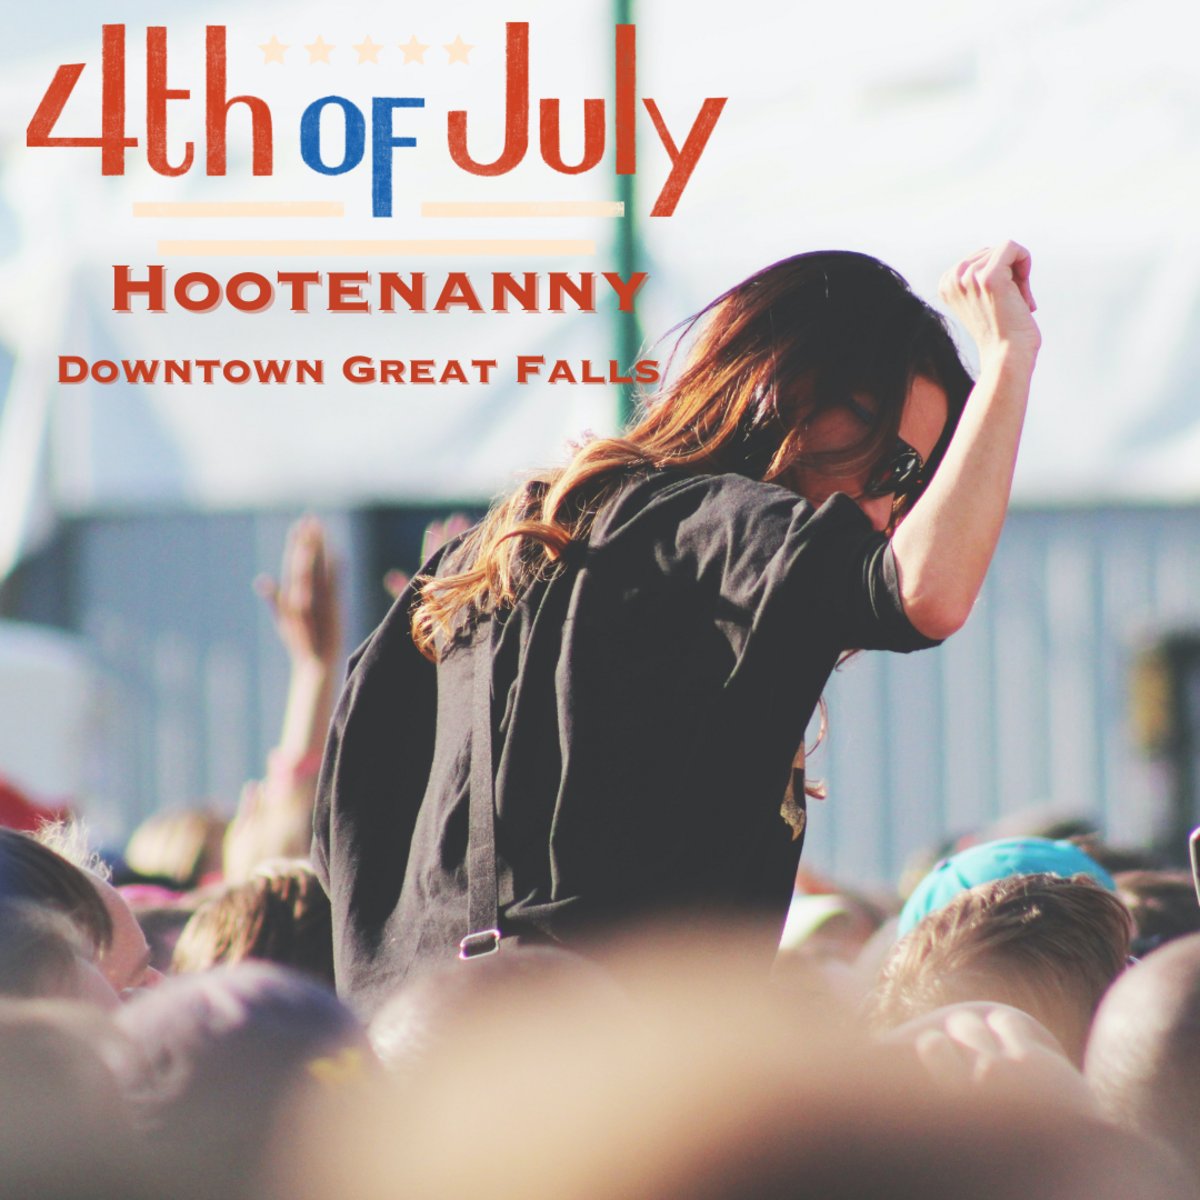 Head down to #DTGreatFalls and join the Fourth of July Hootenanny for a #freeconcert featuring  Australian country singer #MorganEvans! Along with the music, you can enjoy delicious food from various #foodtrucks and even dance away the night. Visit bit.ly/3Q1HUM8.